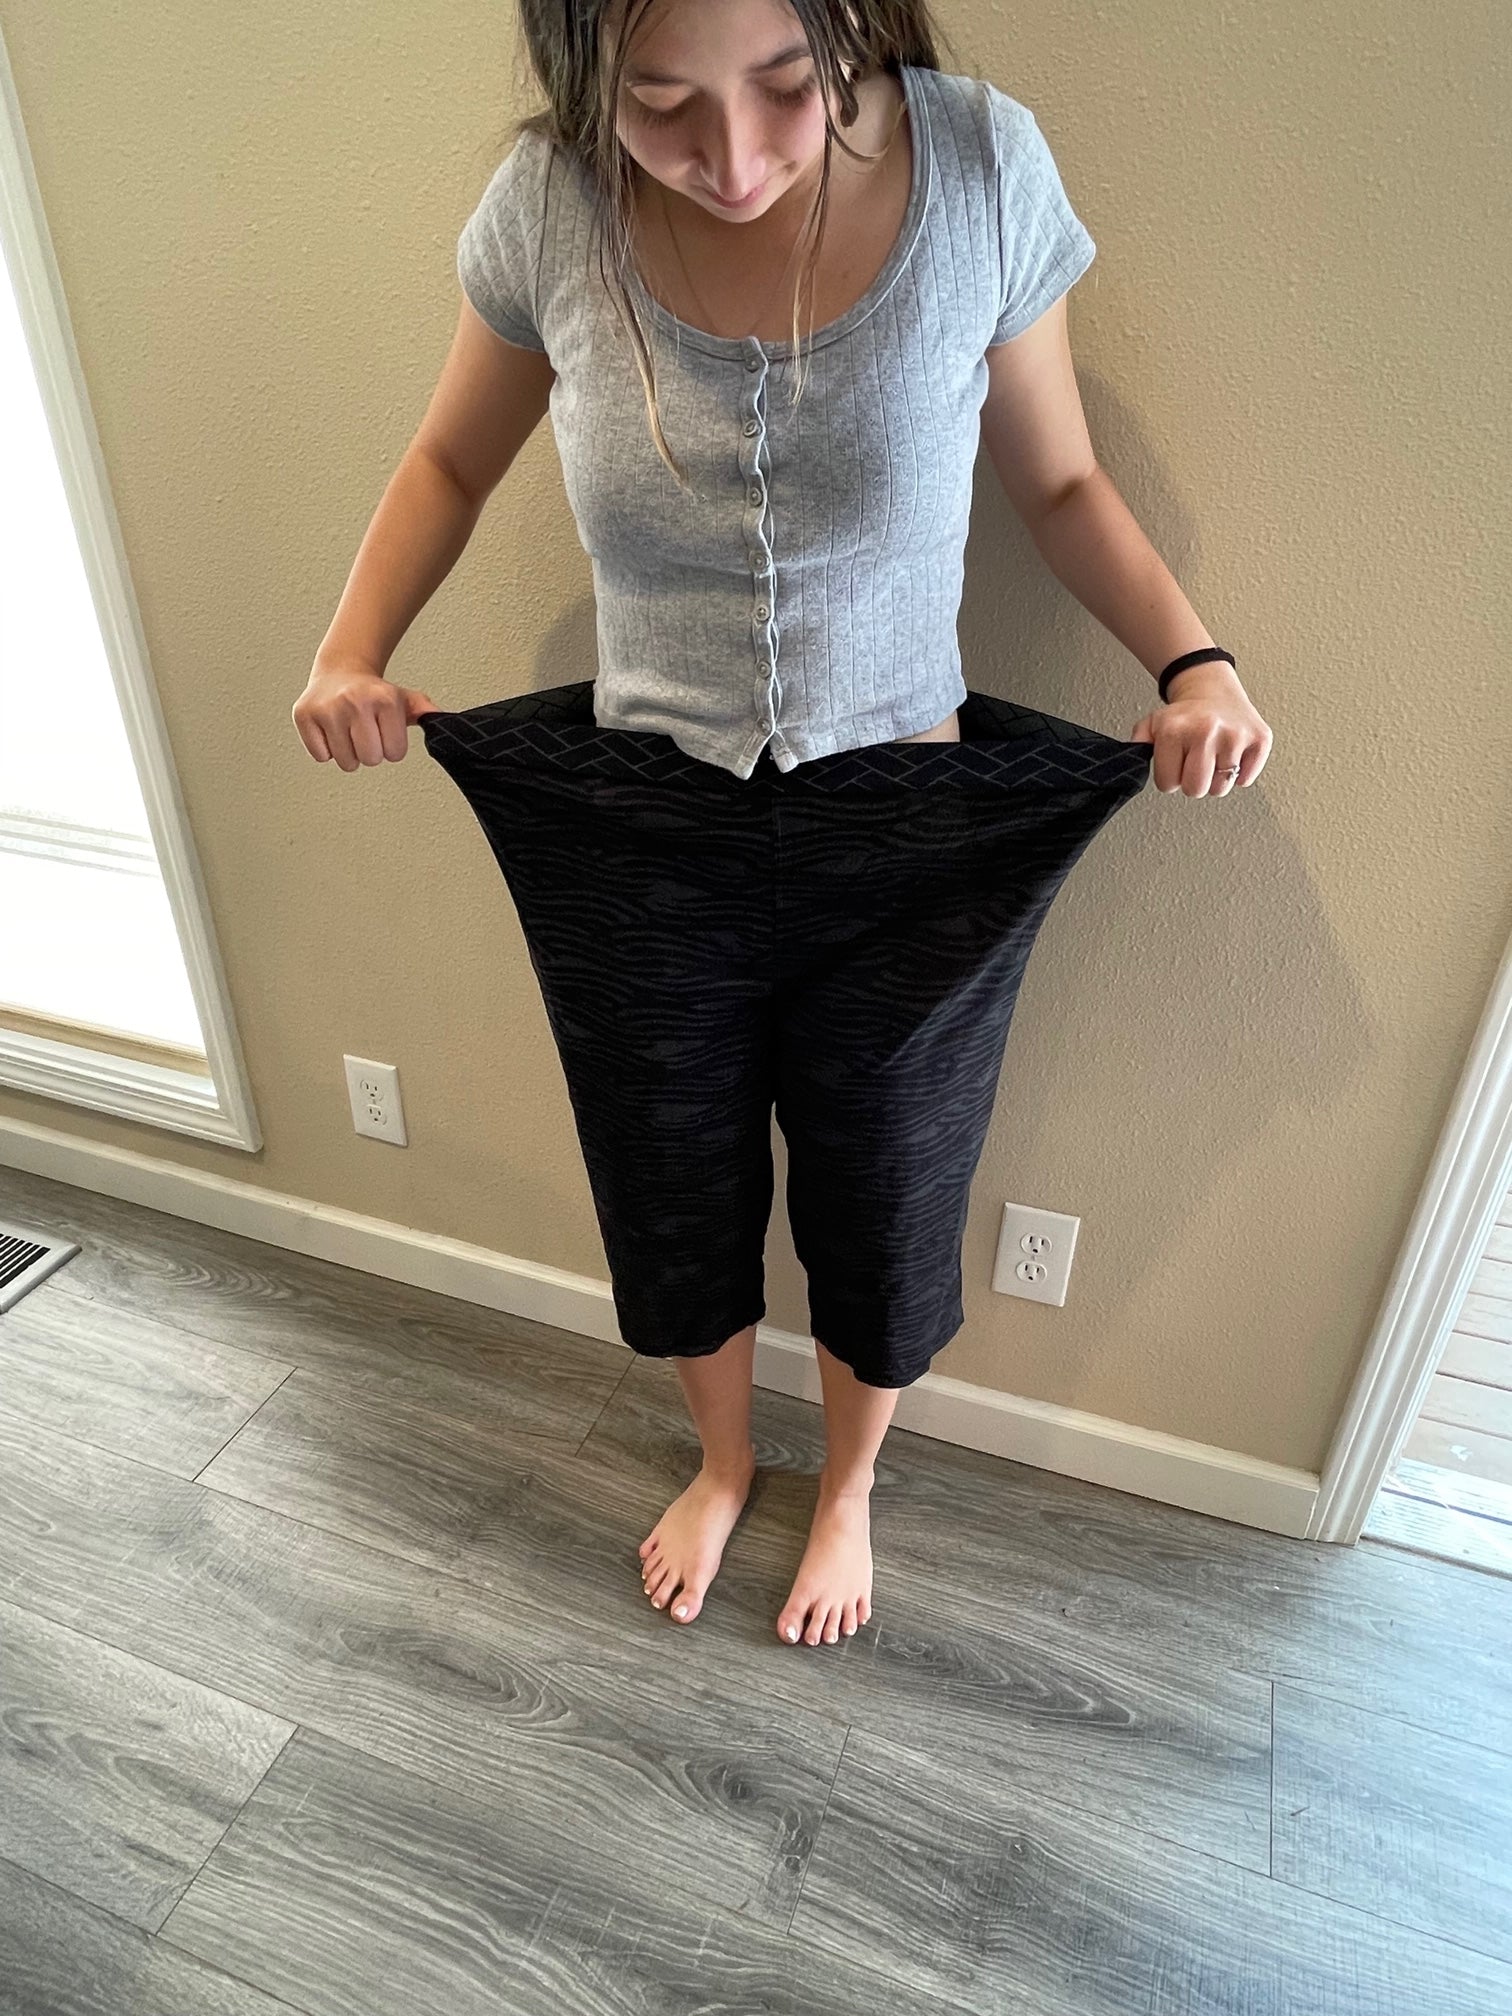 Cool Stretchy Comfy Steteco Lounge Pants in a Gift Box | Eternal Waves | Black - CHERRYSTONEstyle